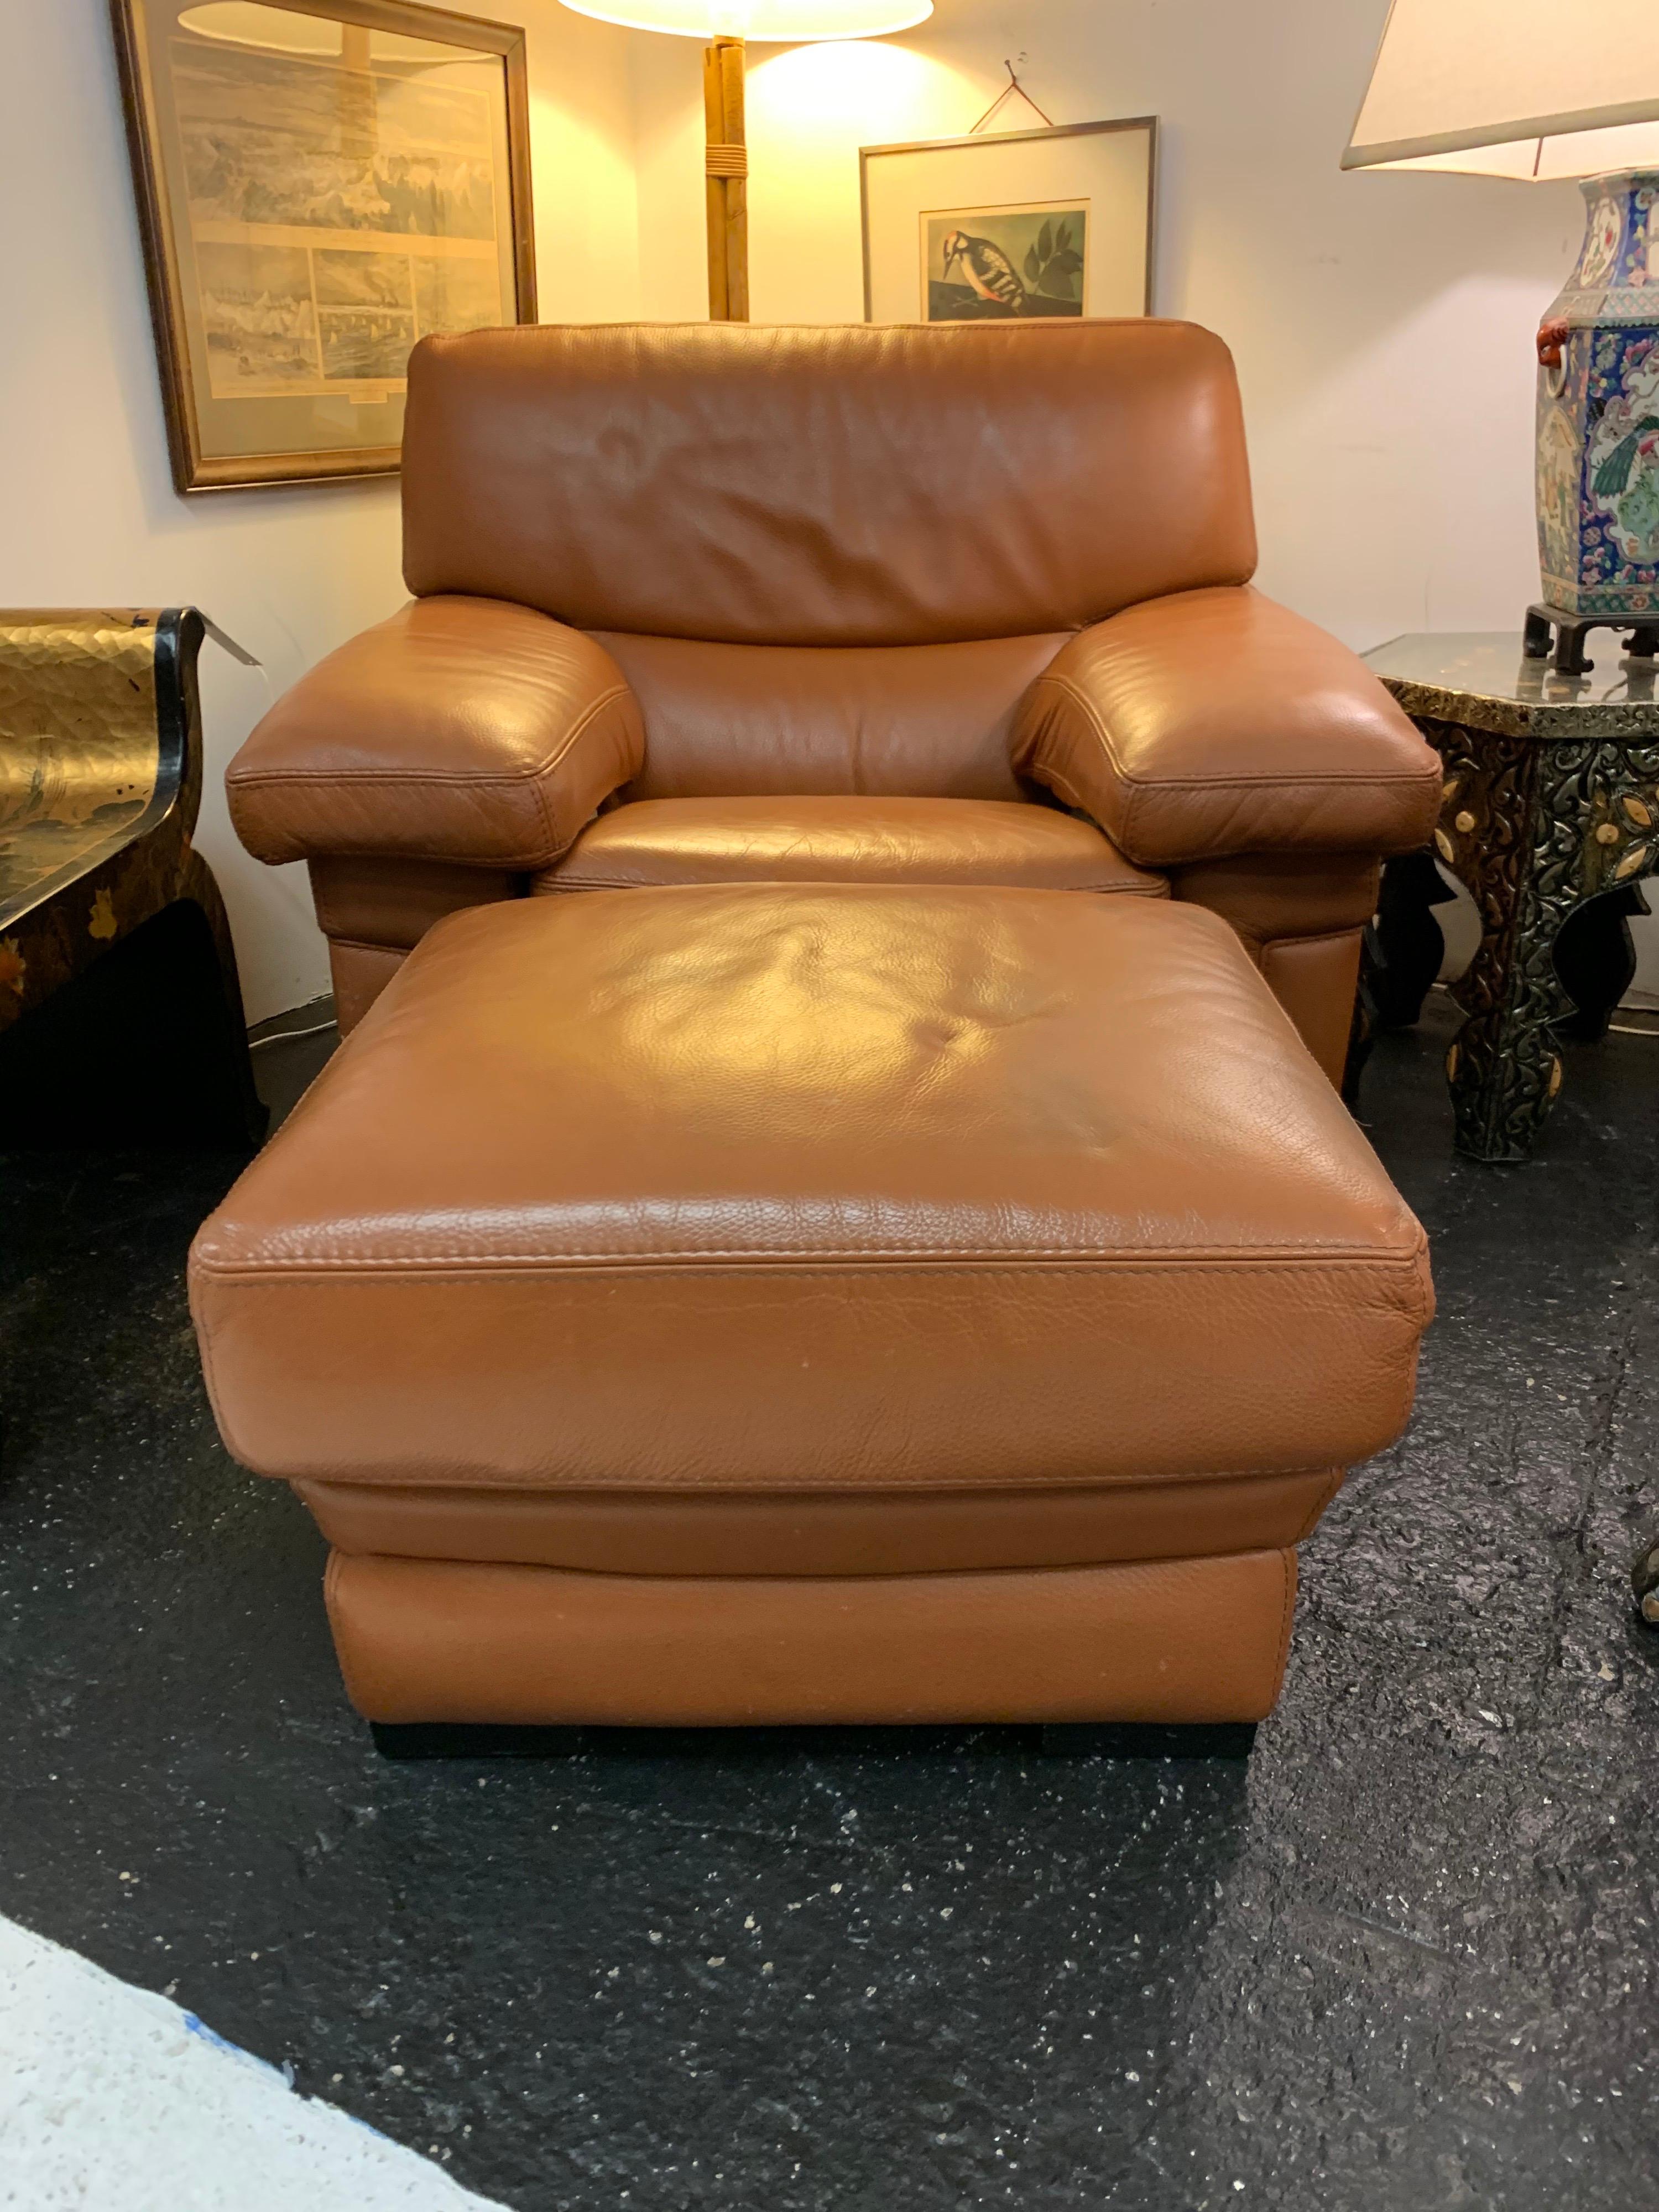 Made in France by the esteemed maker Roche Bobois is this post modern large brown pebbled leather chair with matching ottoman. The ottoman measure 24 x 24 x 15 inches tall and the chair dimensions are below.